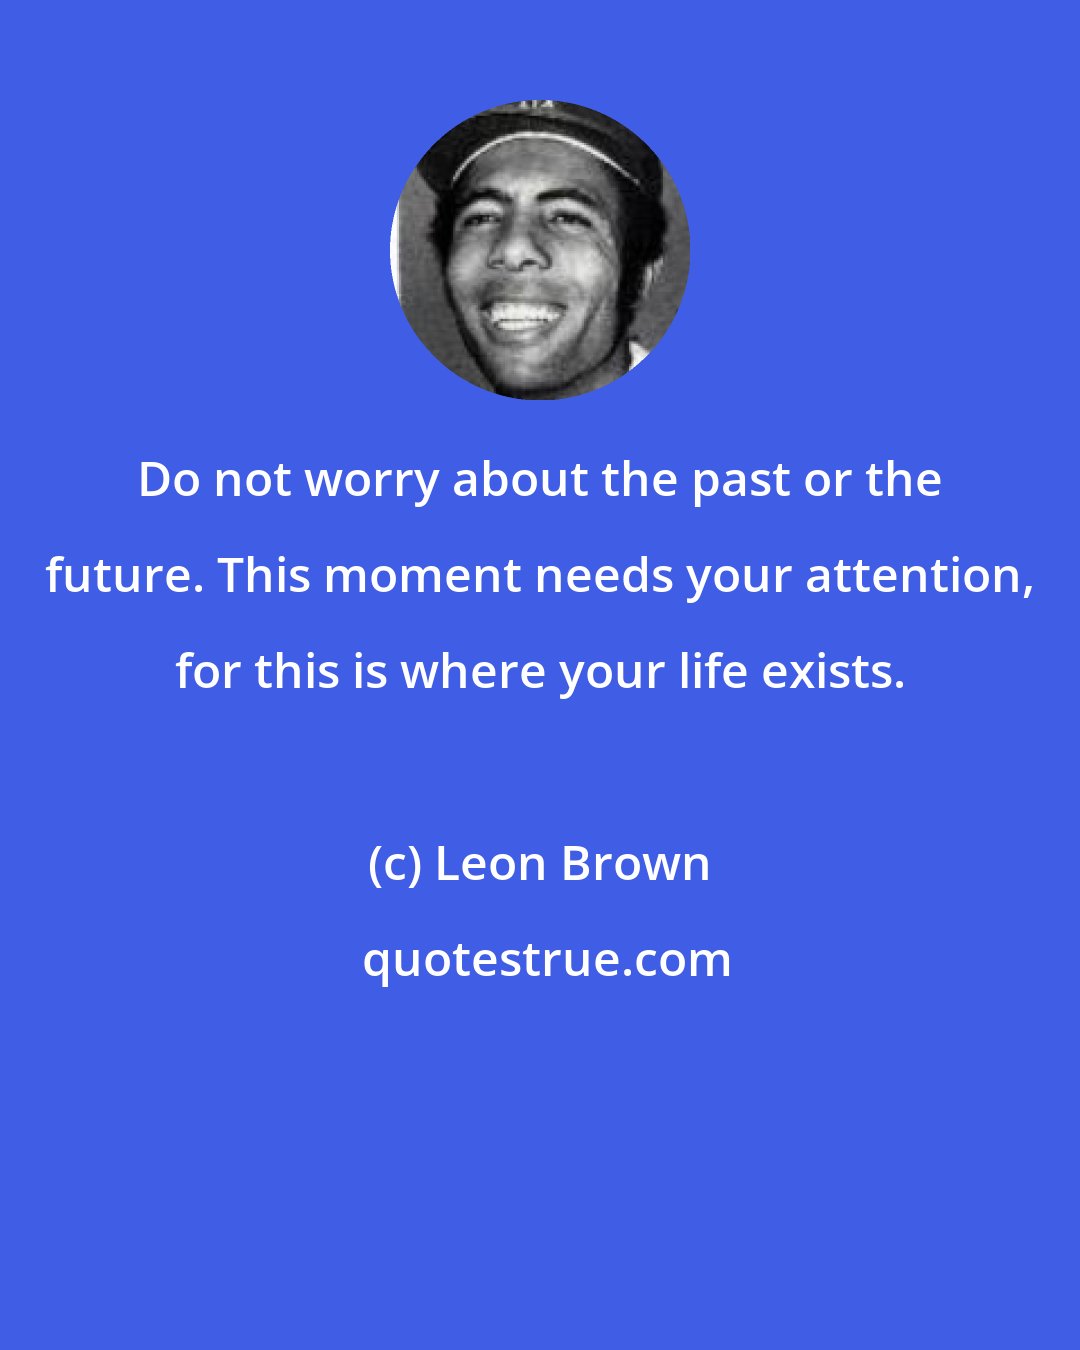 Leon Brown: Do not worry about the past or the future. This moment needs your attention, for this is where your life exists.